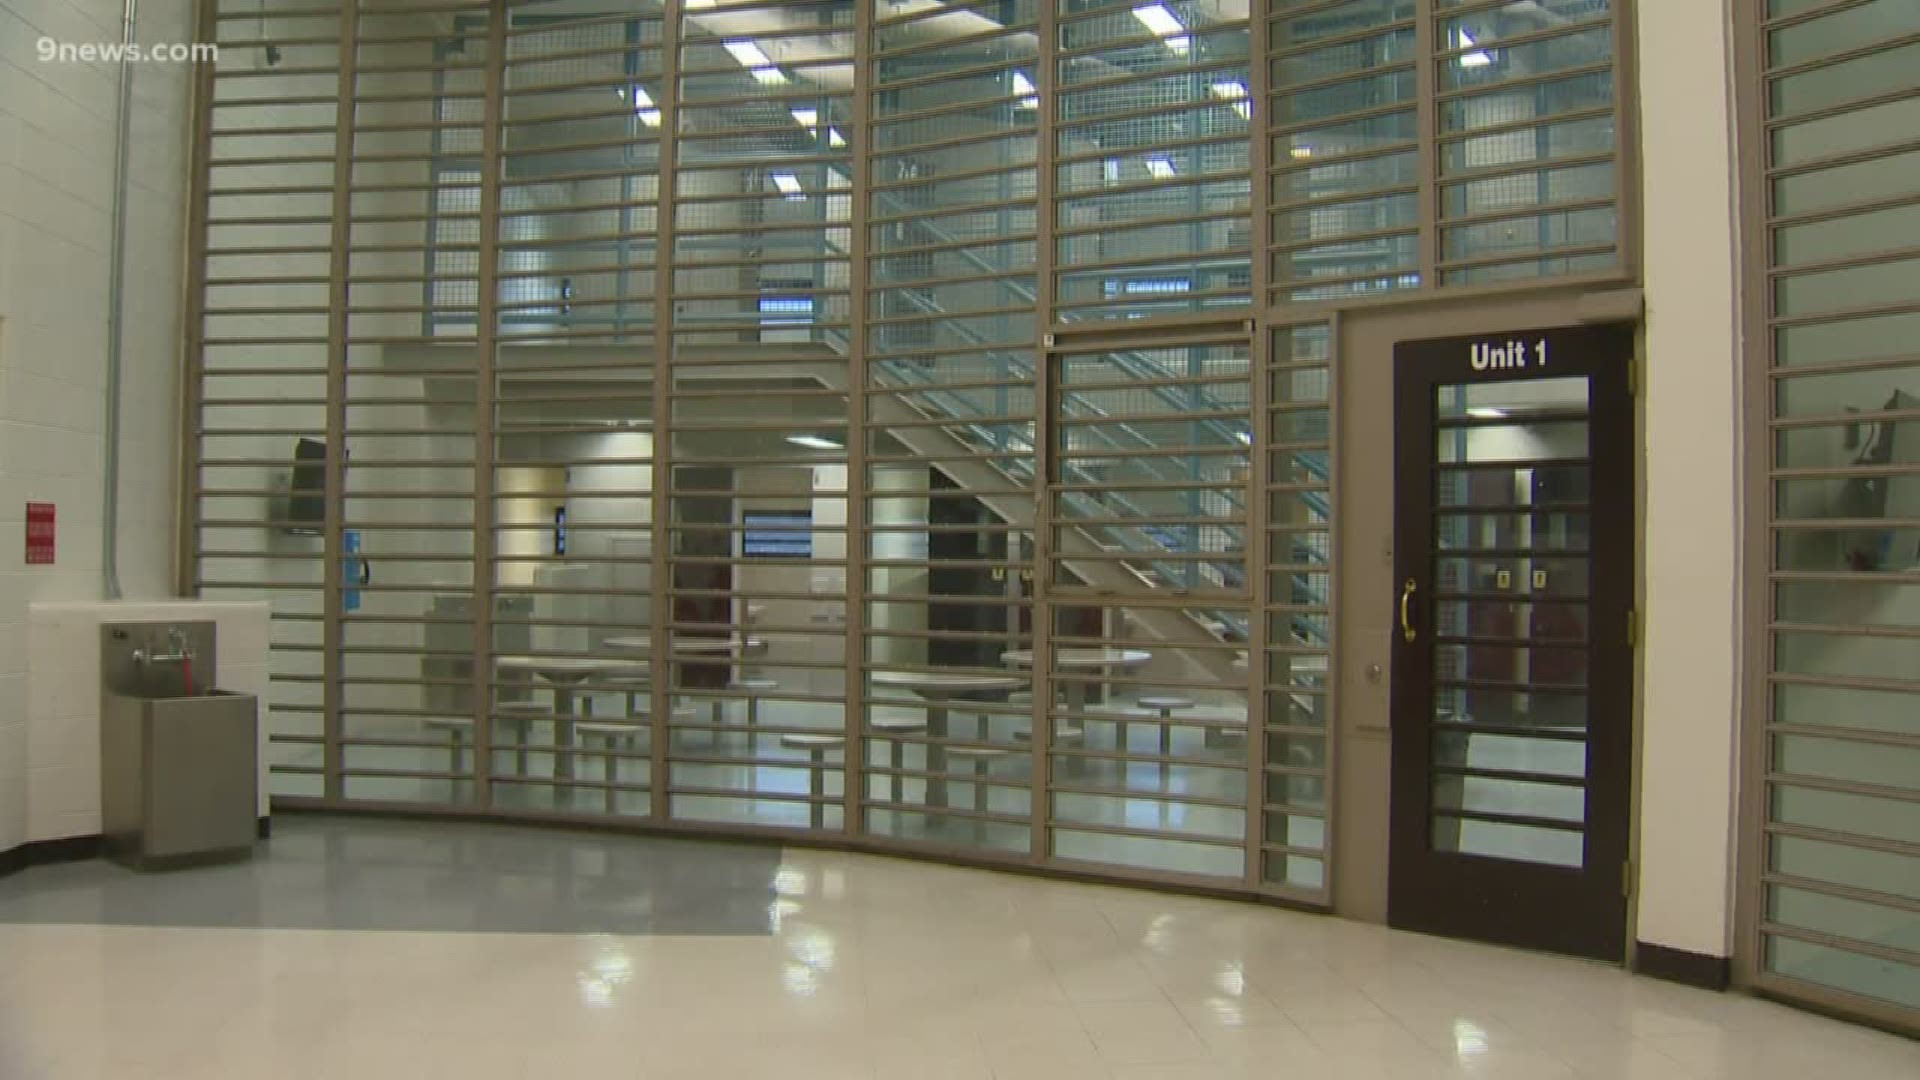 The Jefferson County Sheriff announced last year that due to budget shortfalls, they needed to reduce the jail capacity.